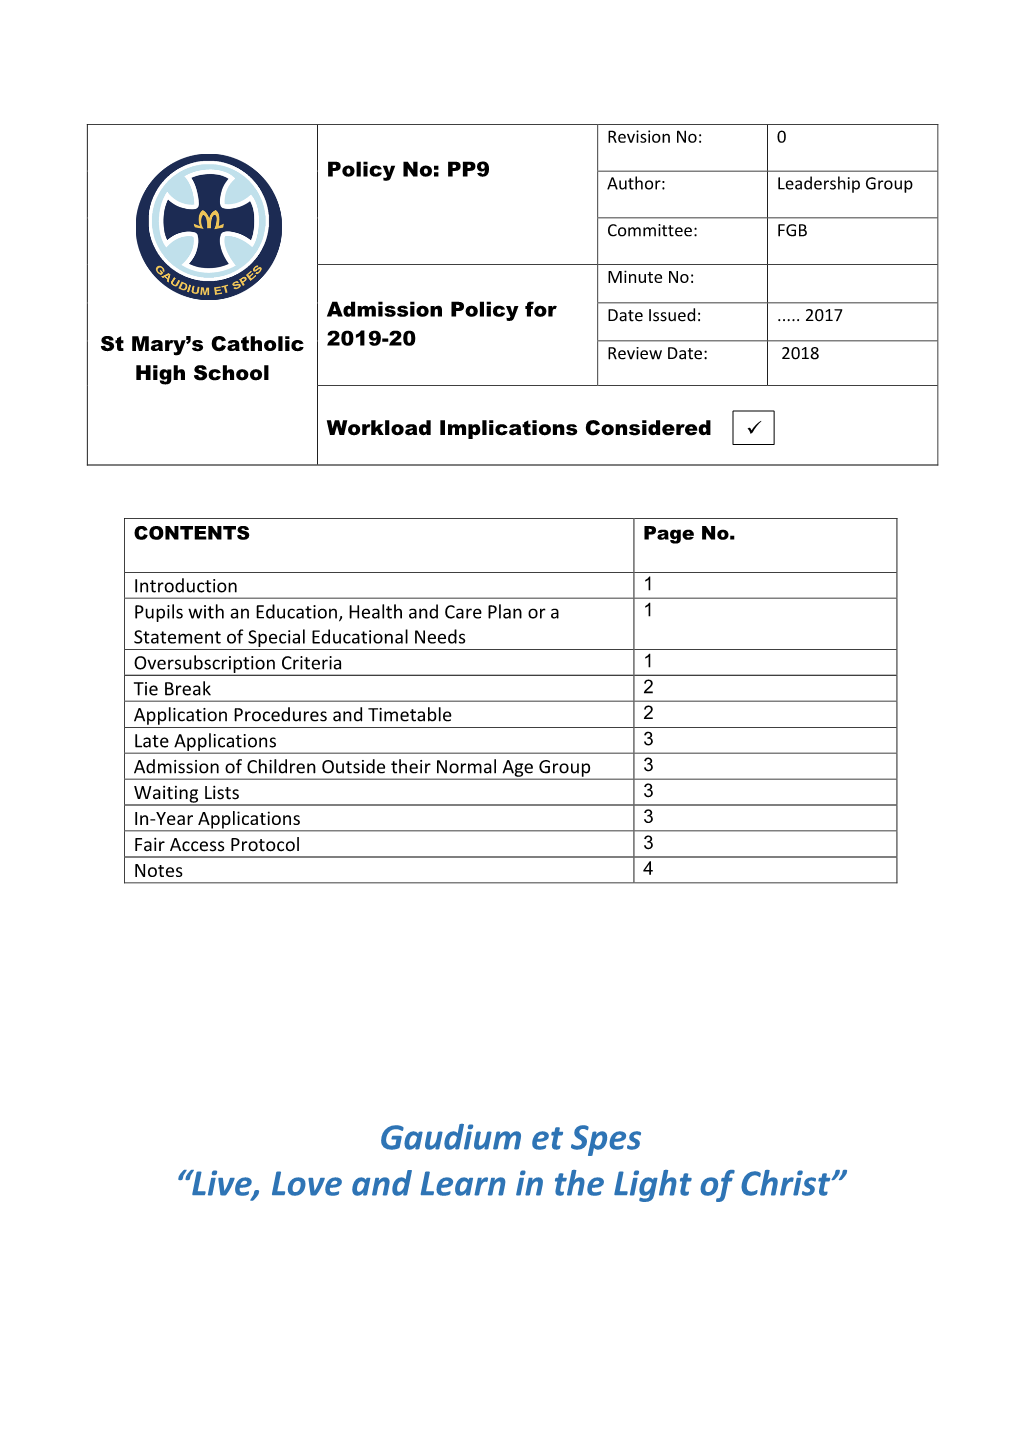 Gaudium Et Spes “Live, Love and Learn in the Light of Christ”